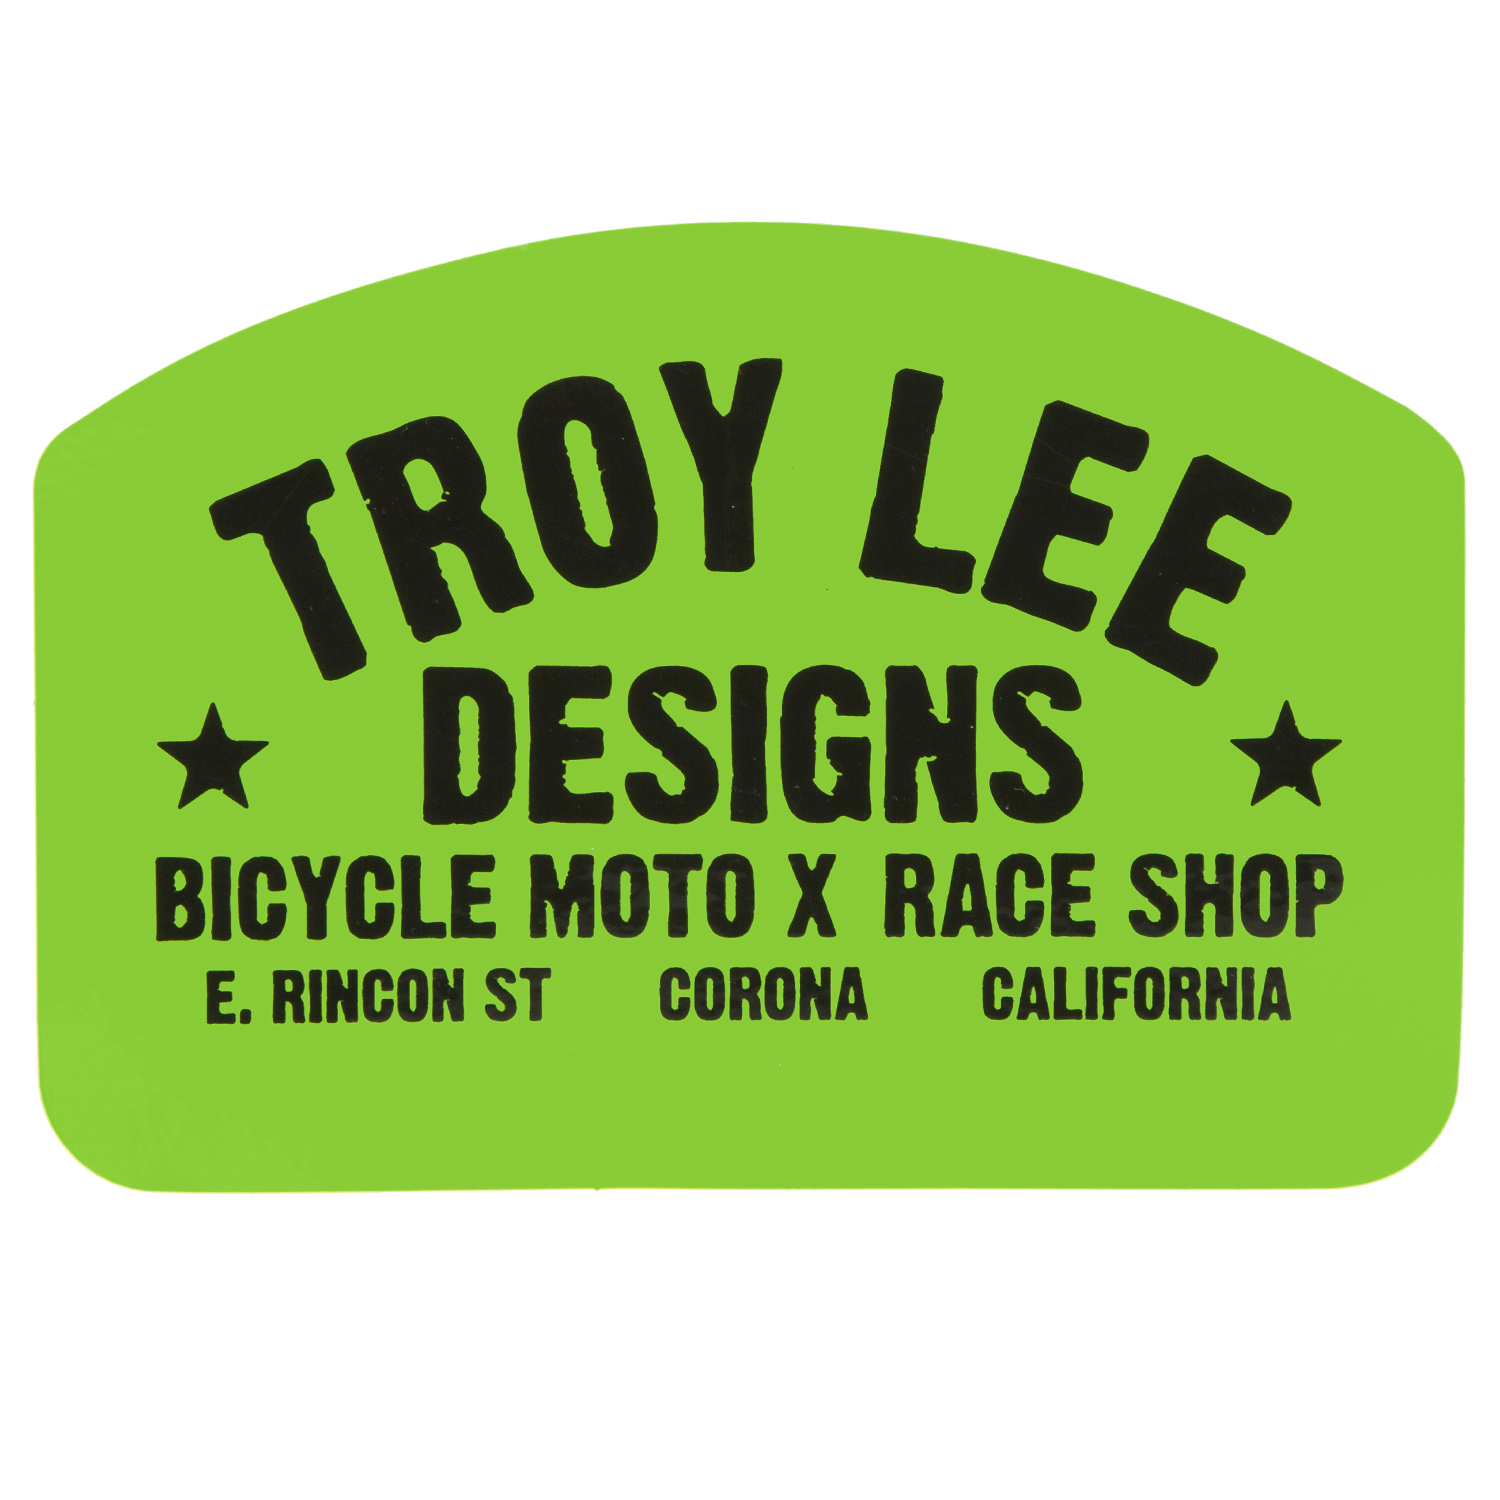 Troy Lee Designs Sticker Race Shop Green/Black - 3.5 inches